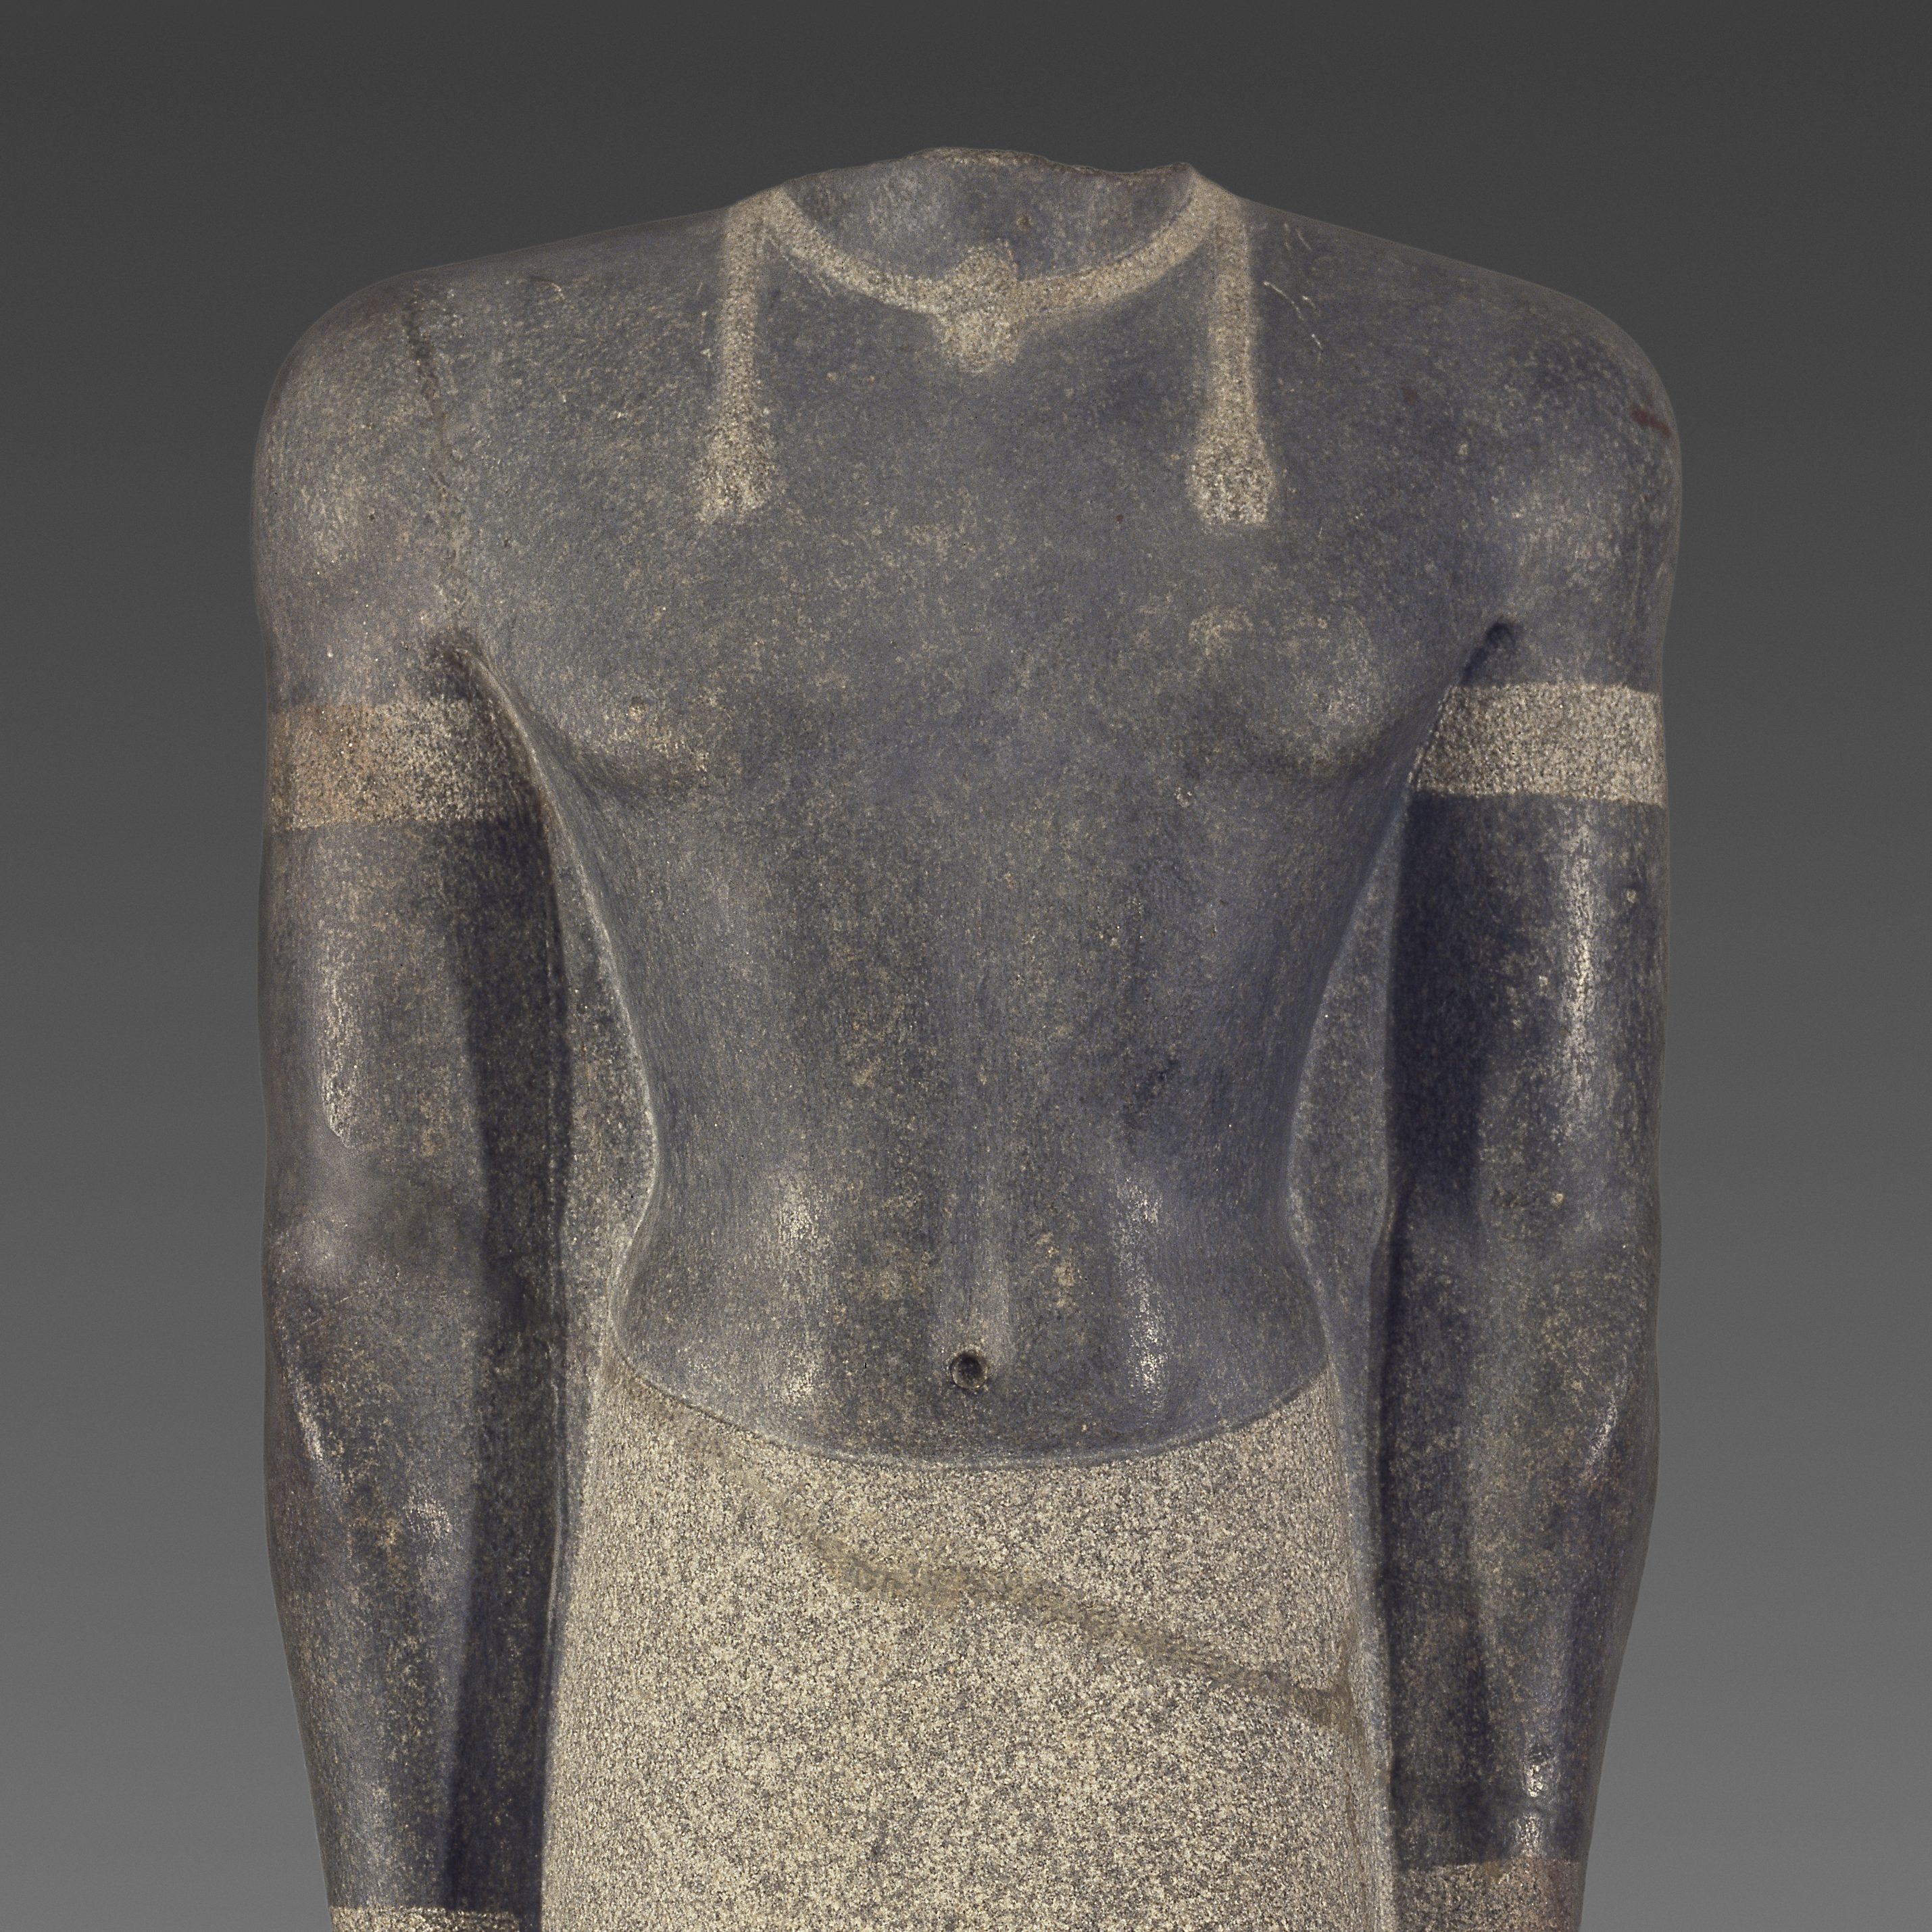 <p>Begin in the Ancient Egyptian Gallery on Level 2. Have fun!</p>
<p>A man in a skirt never looked so good. Find this figure and name the article of clothing he’s wearing.</p>
